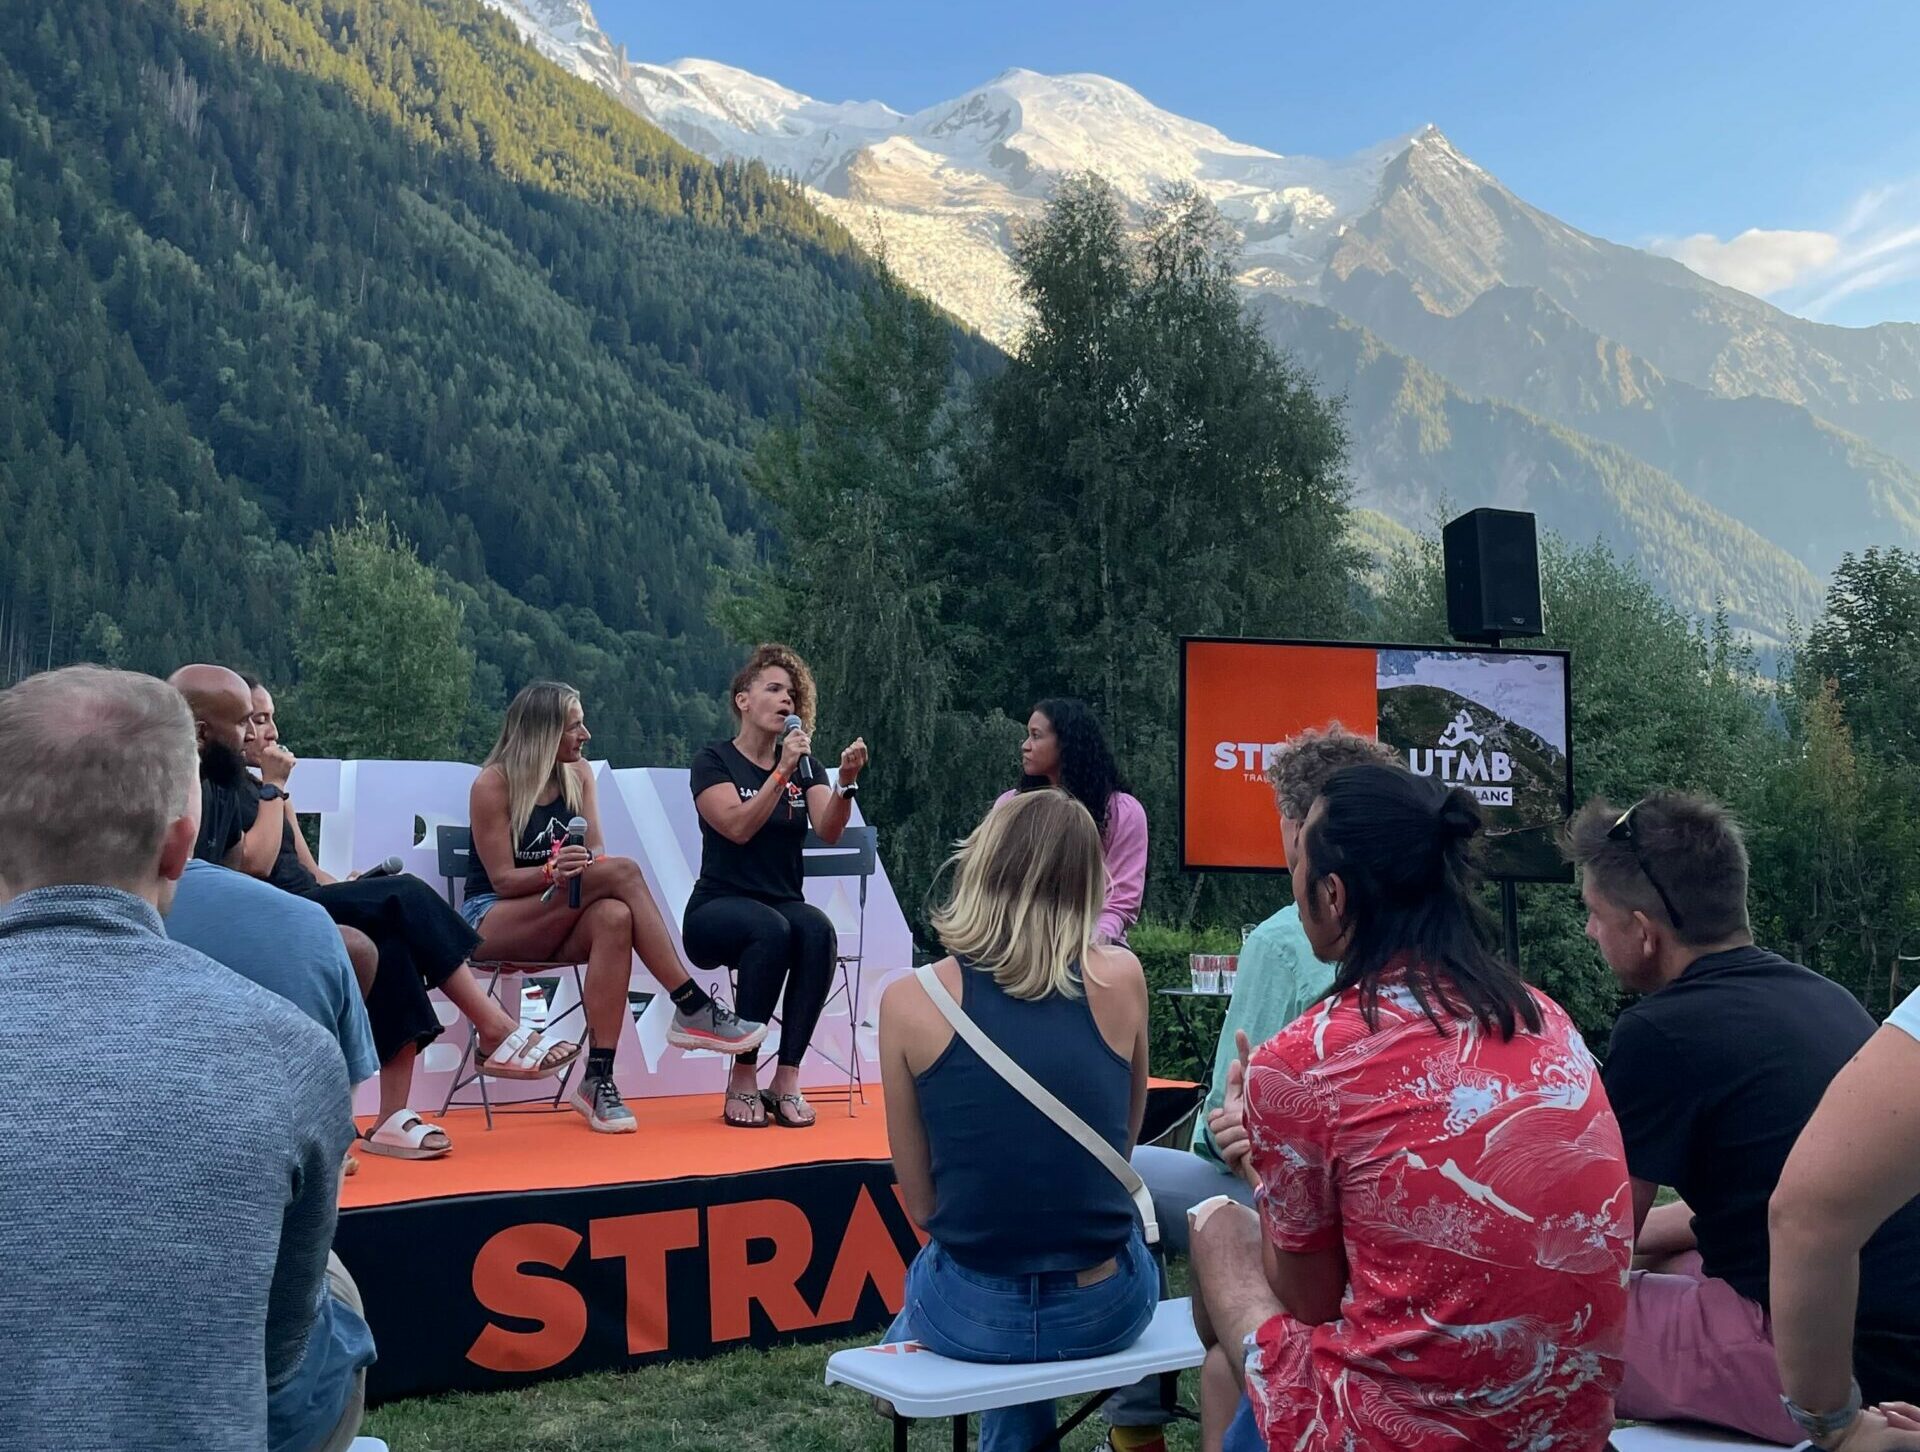 Seven Hills joins Strava at a special event - TrailBlazers -  in Chamonix for UTMB